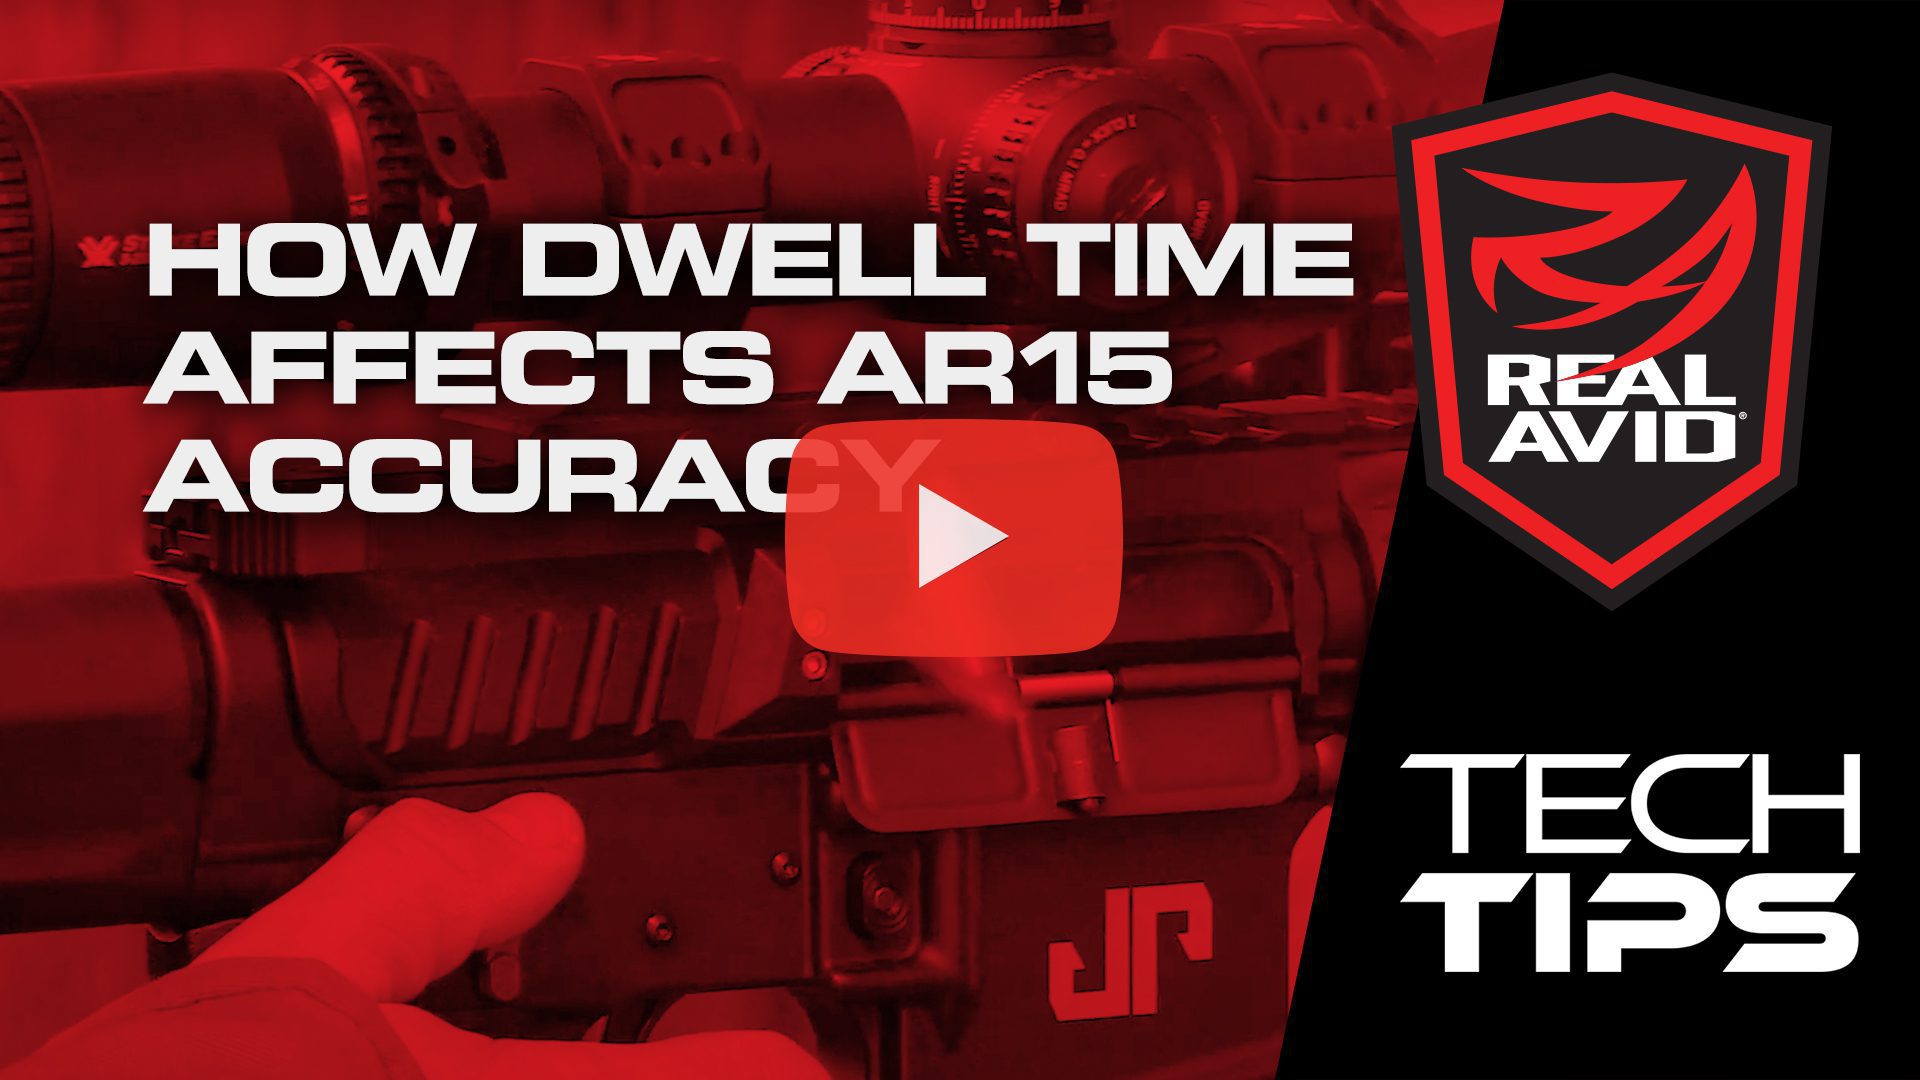 TECH TIPS: How Dwell Time Affects AR15 Accuracy